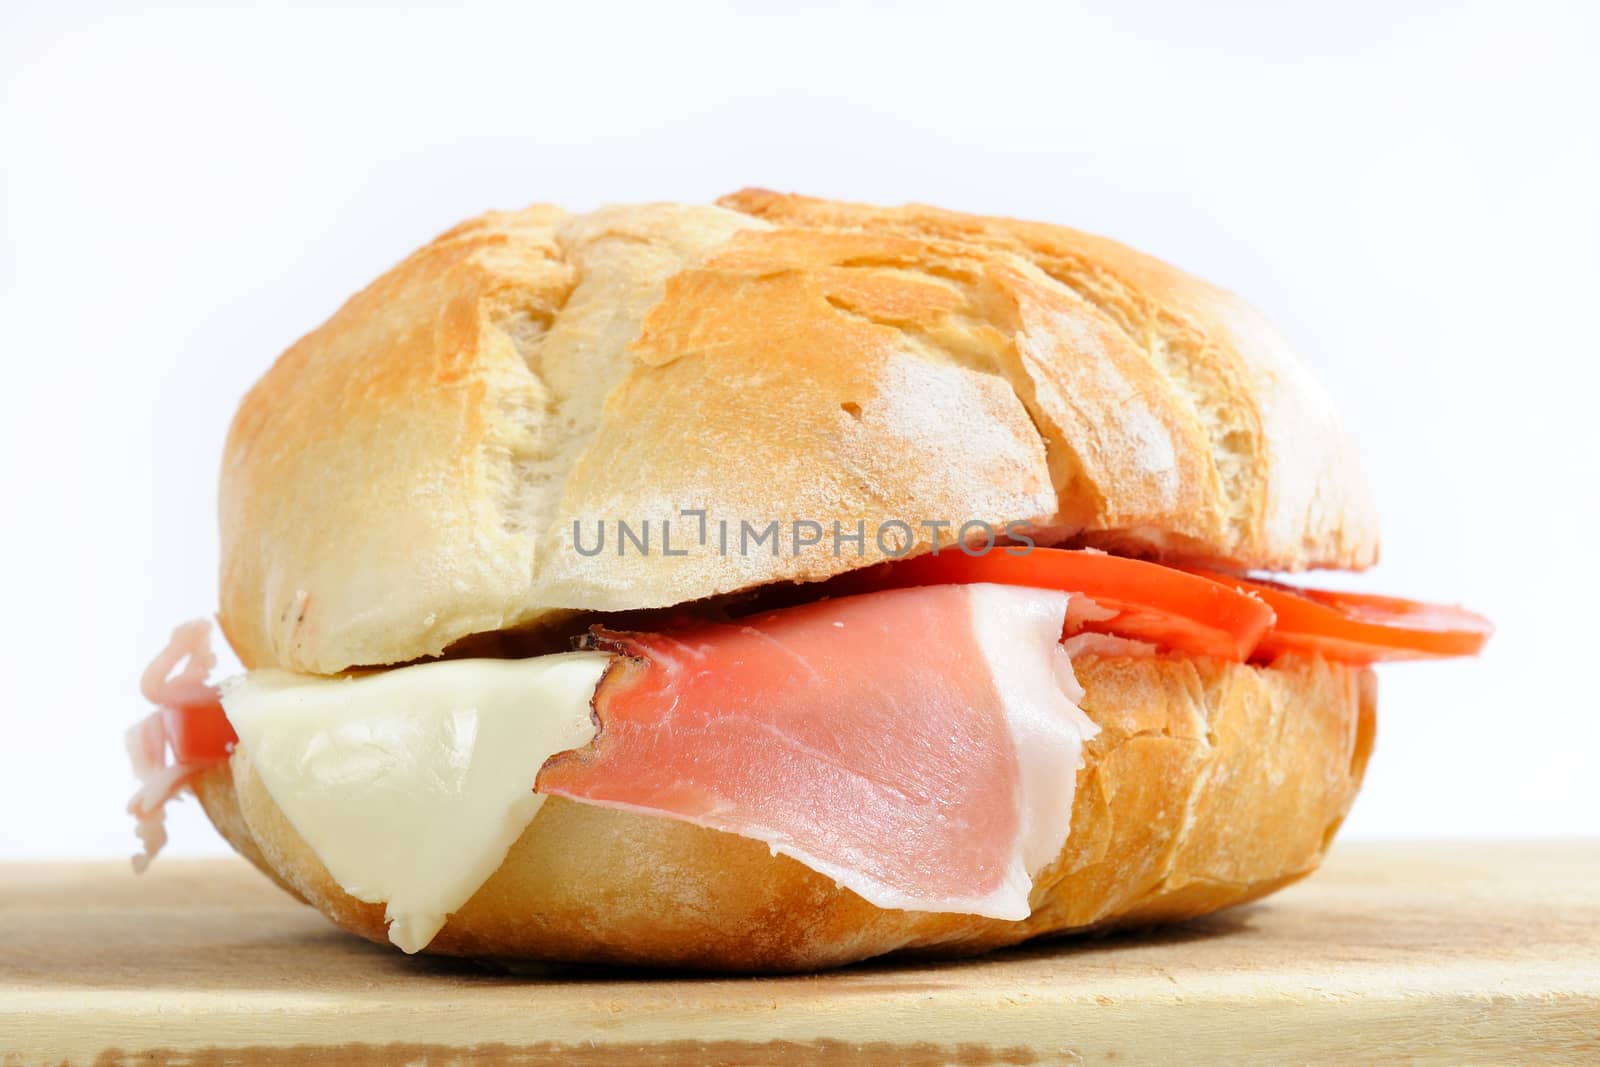 Realization sandwich stuffed with speck ham, cheese and tomato.